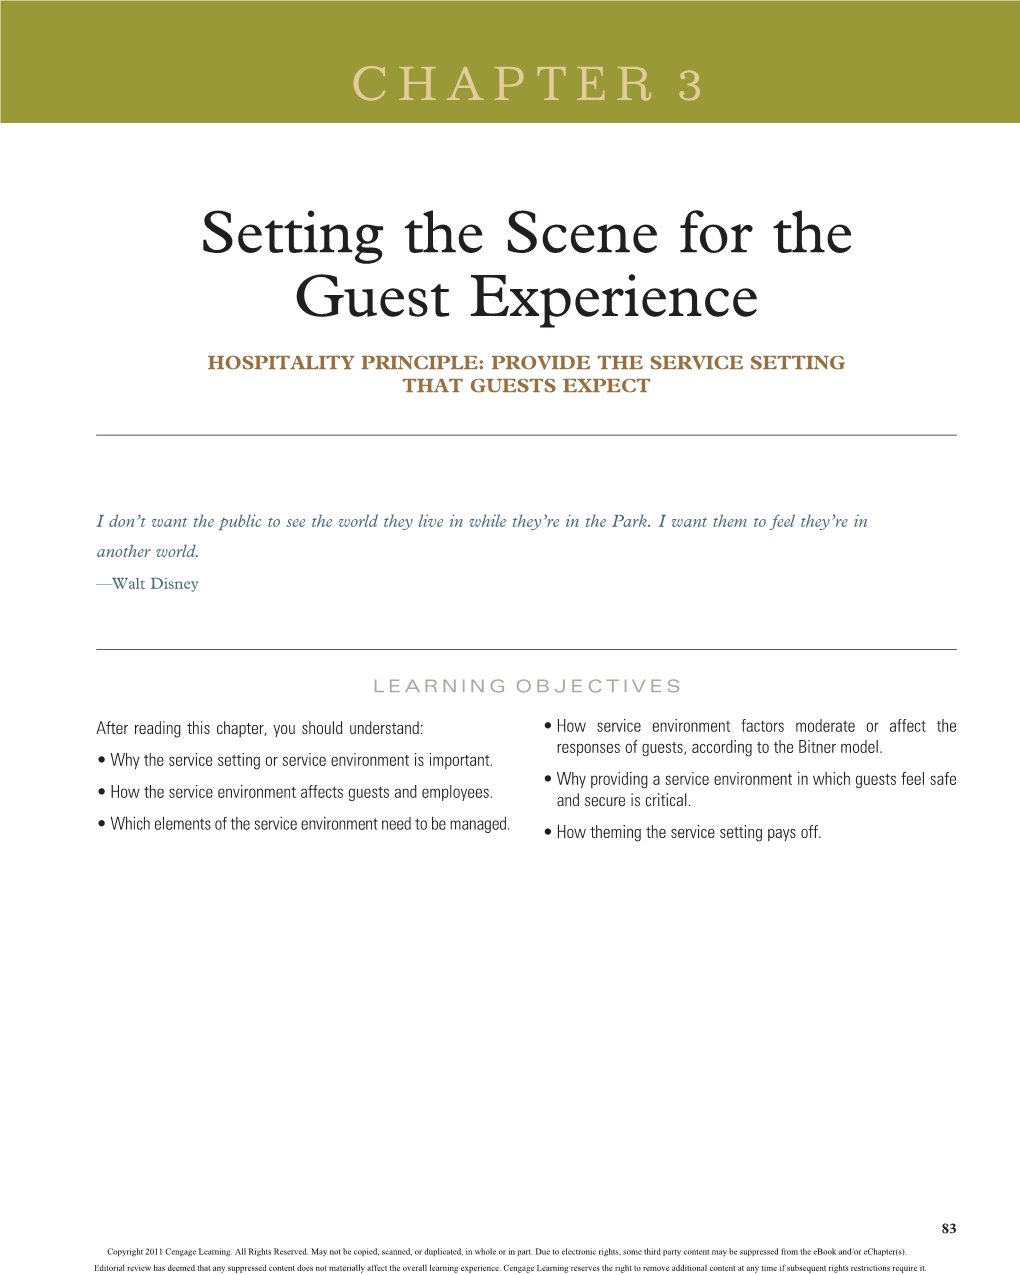 Setting the Scene for the Guest Experience